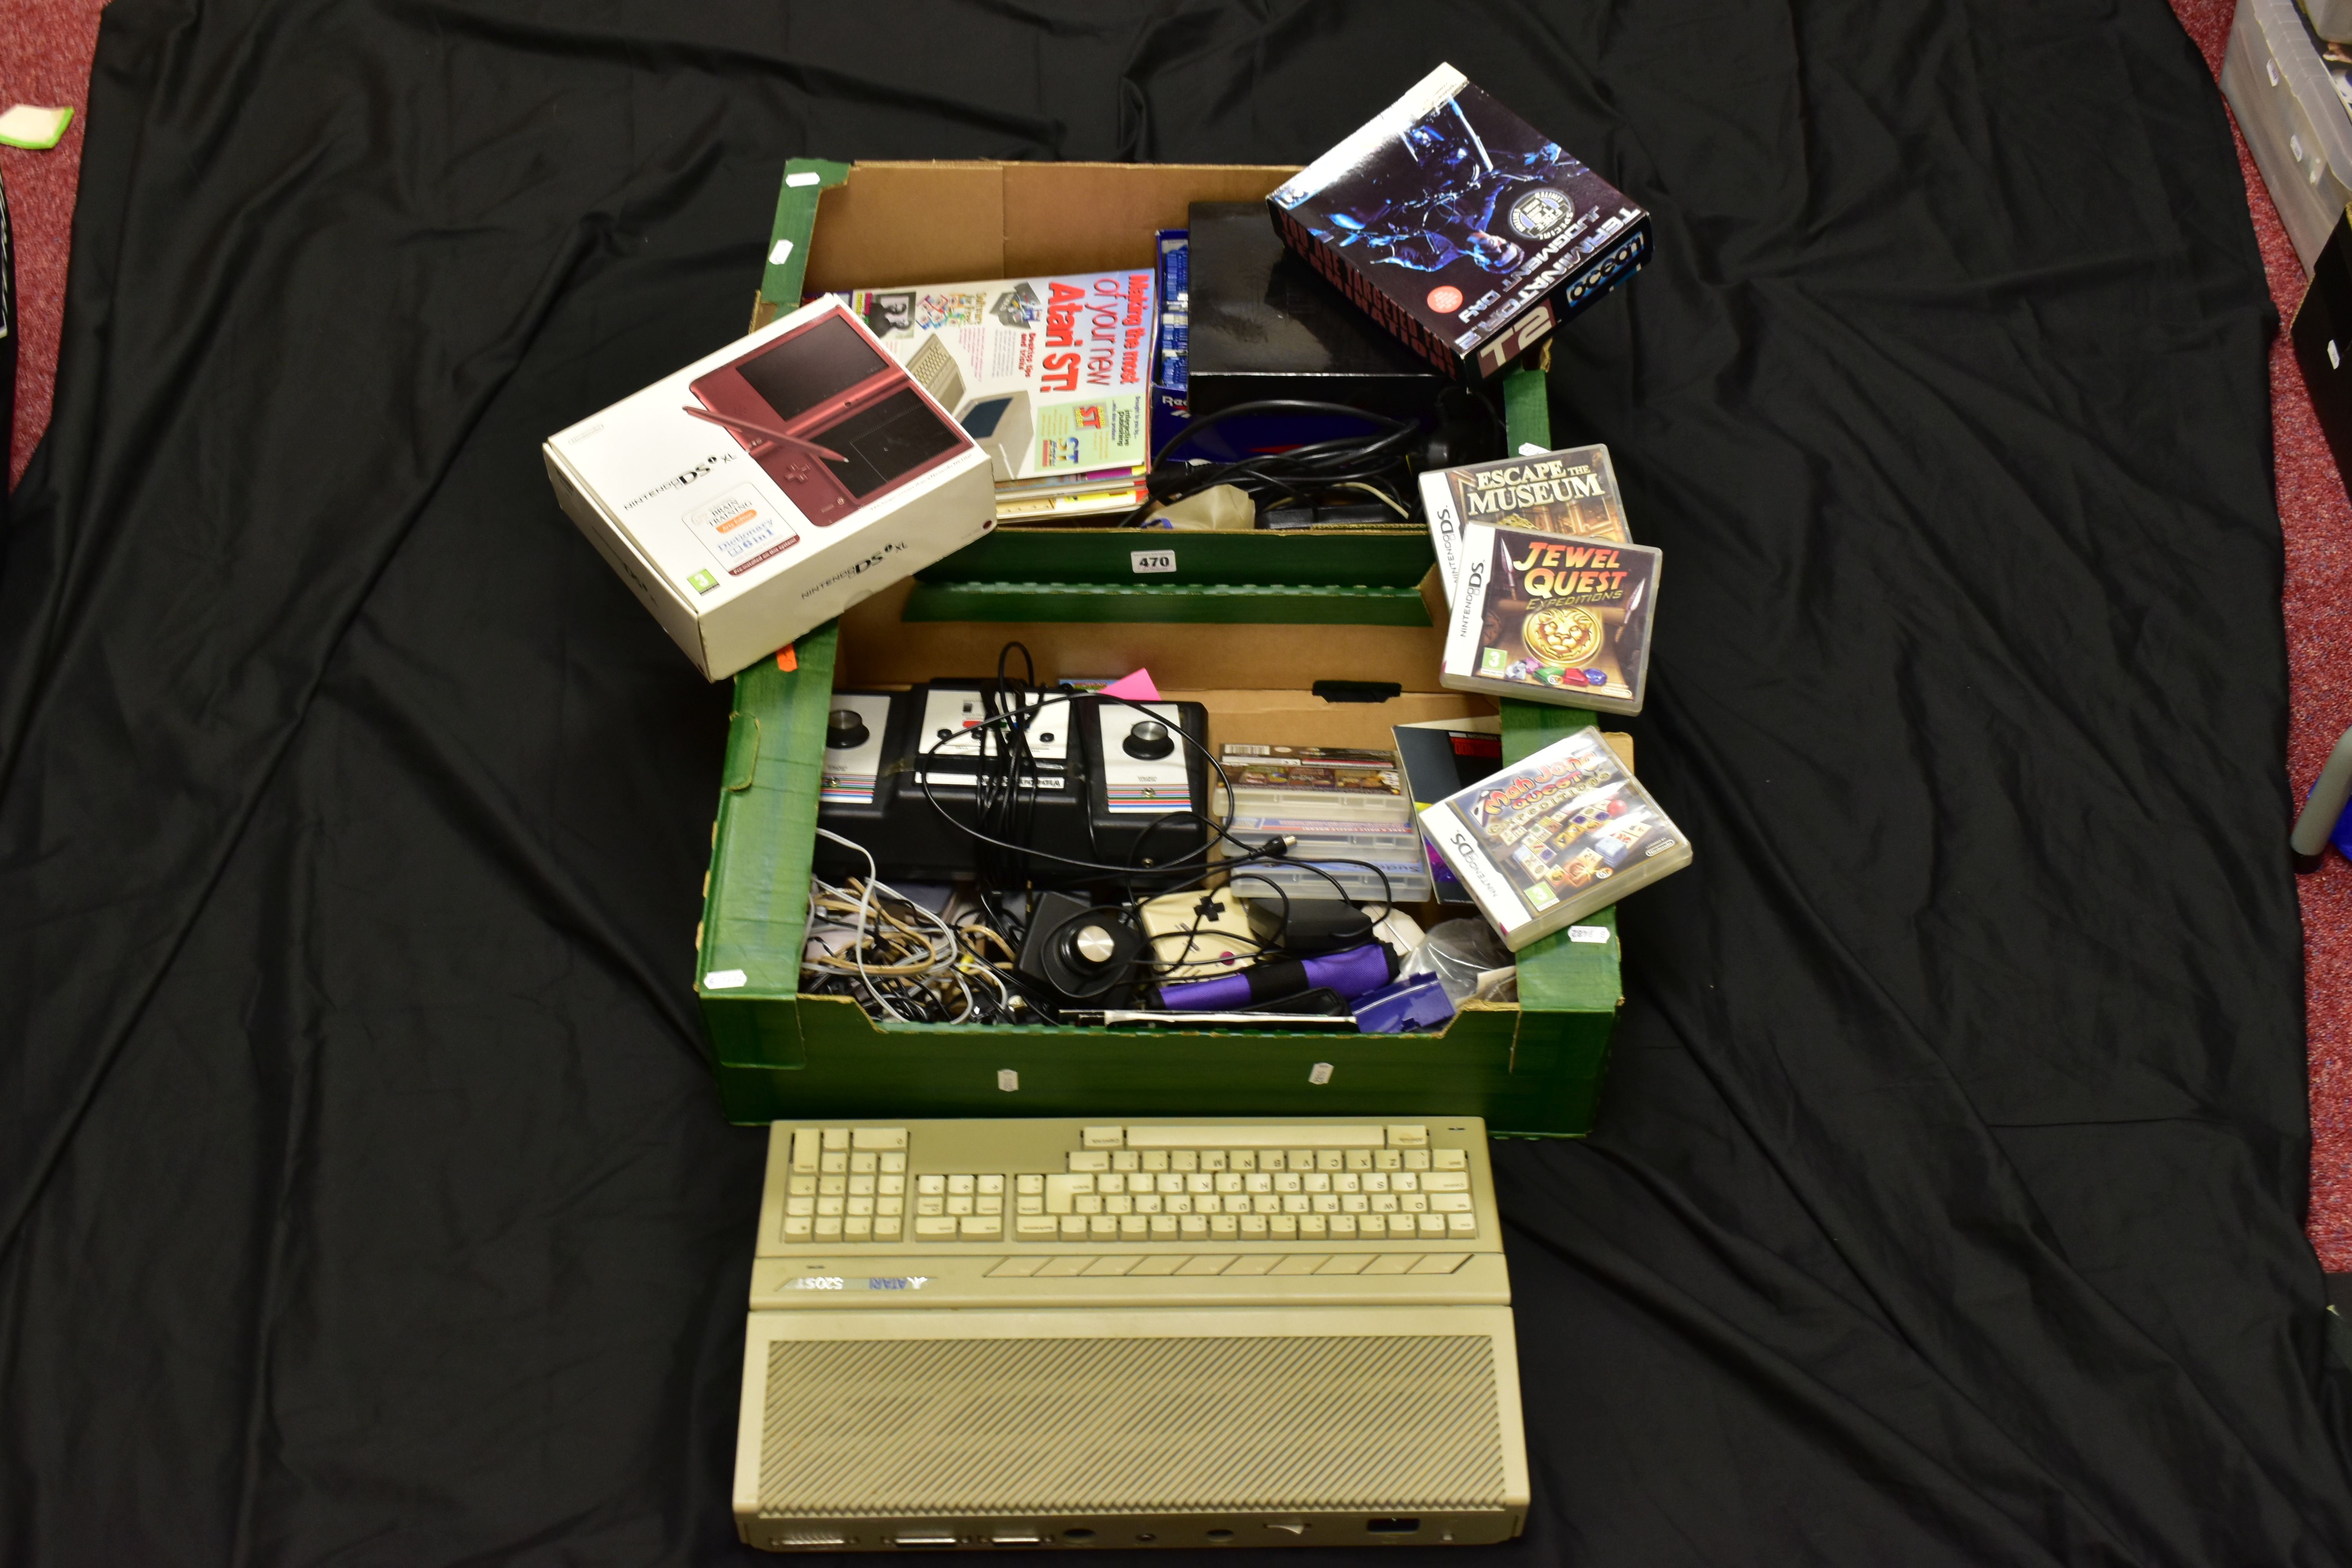 TWO TRAYS CONTAINING GAMING EQUIPMENT including an Atari 520STFM Personal Computer with power cable,